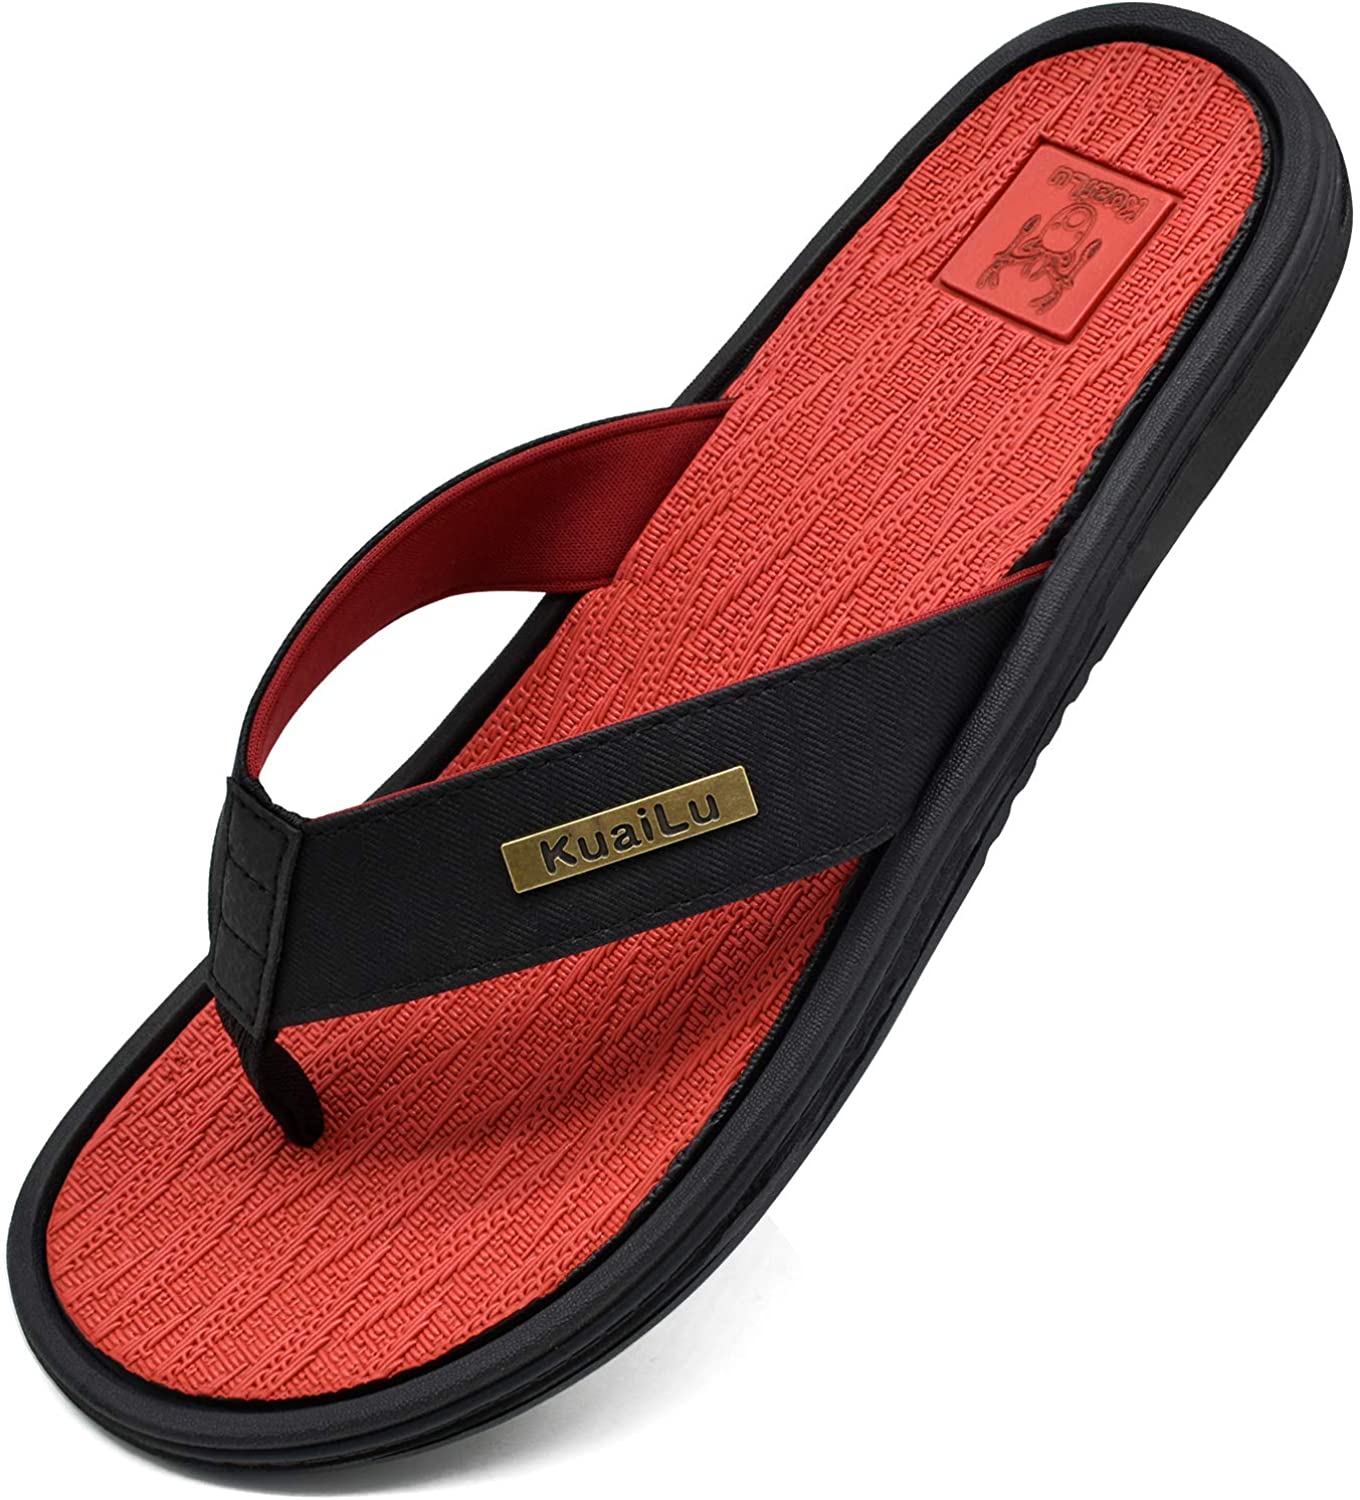 KuaiLu Mens Leather Sport Flip Flops Comfort Orthotic Thong Sandals with Plantar Fasciitis Arch Support for Outdoor Summer Size 7~13